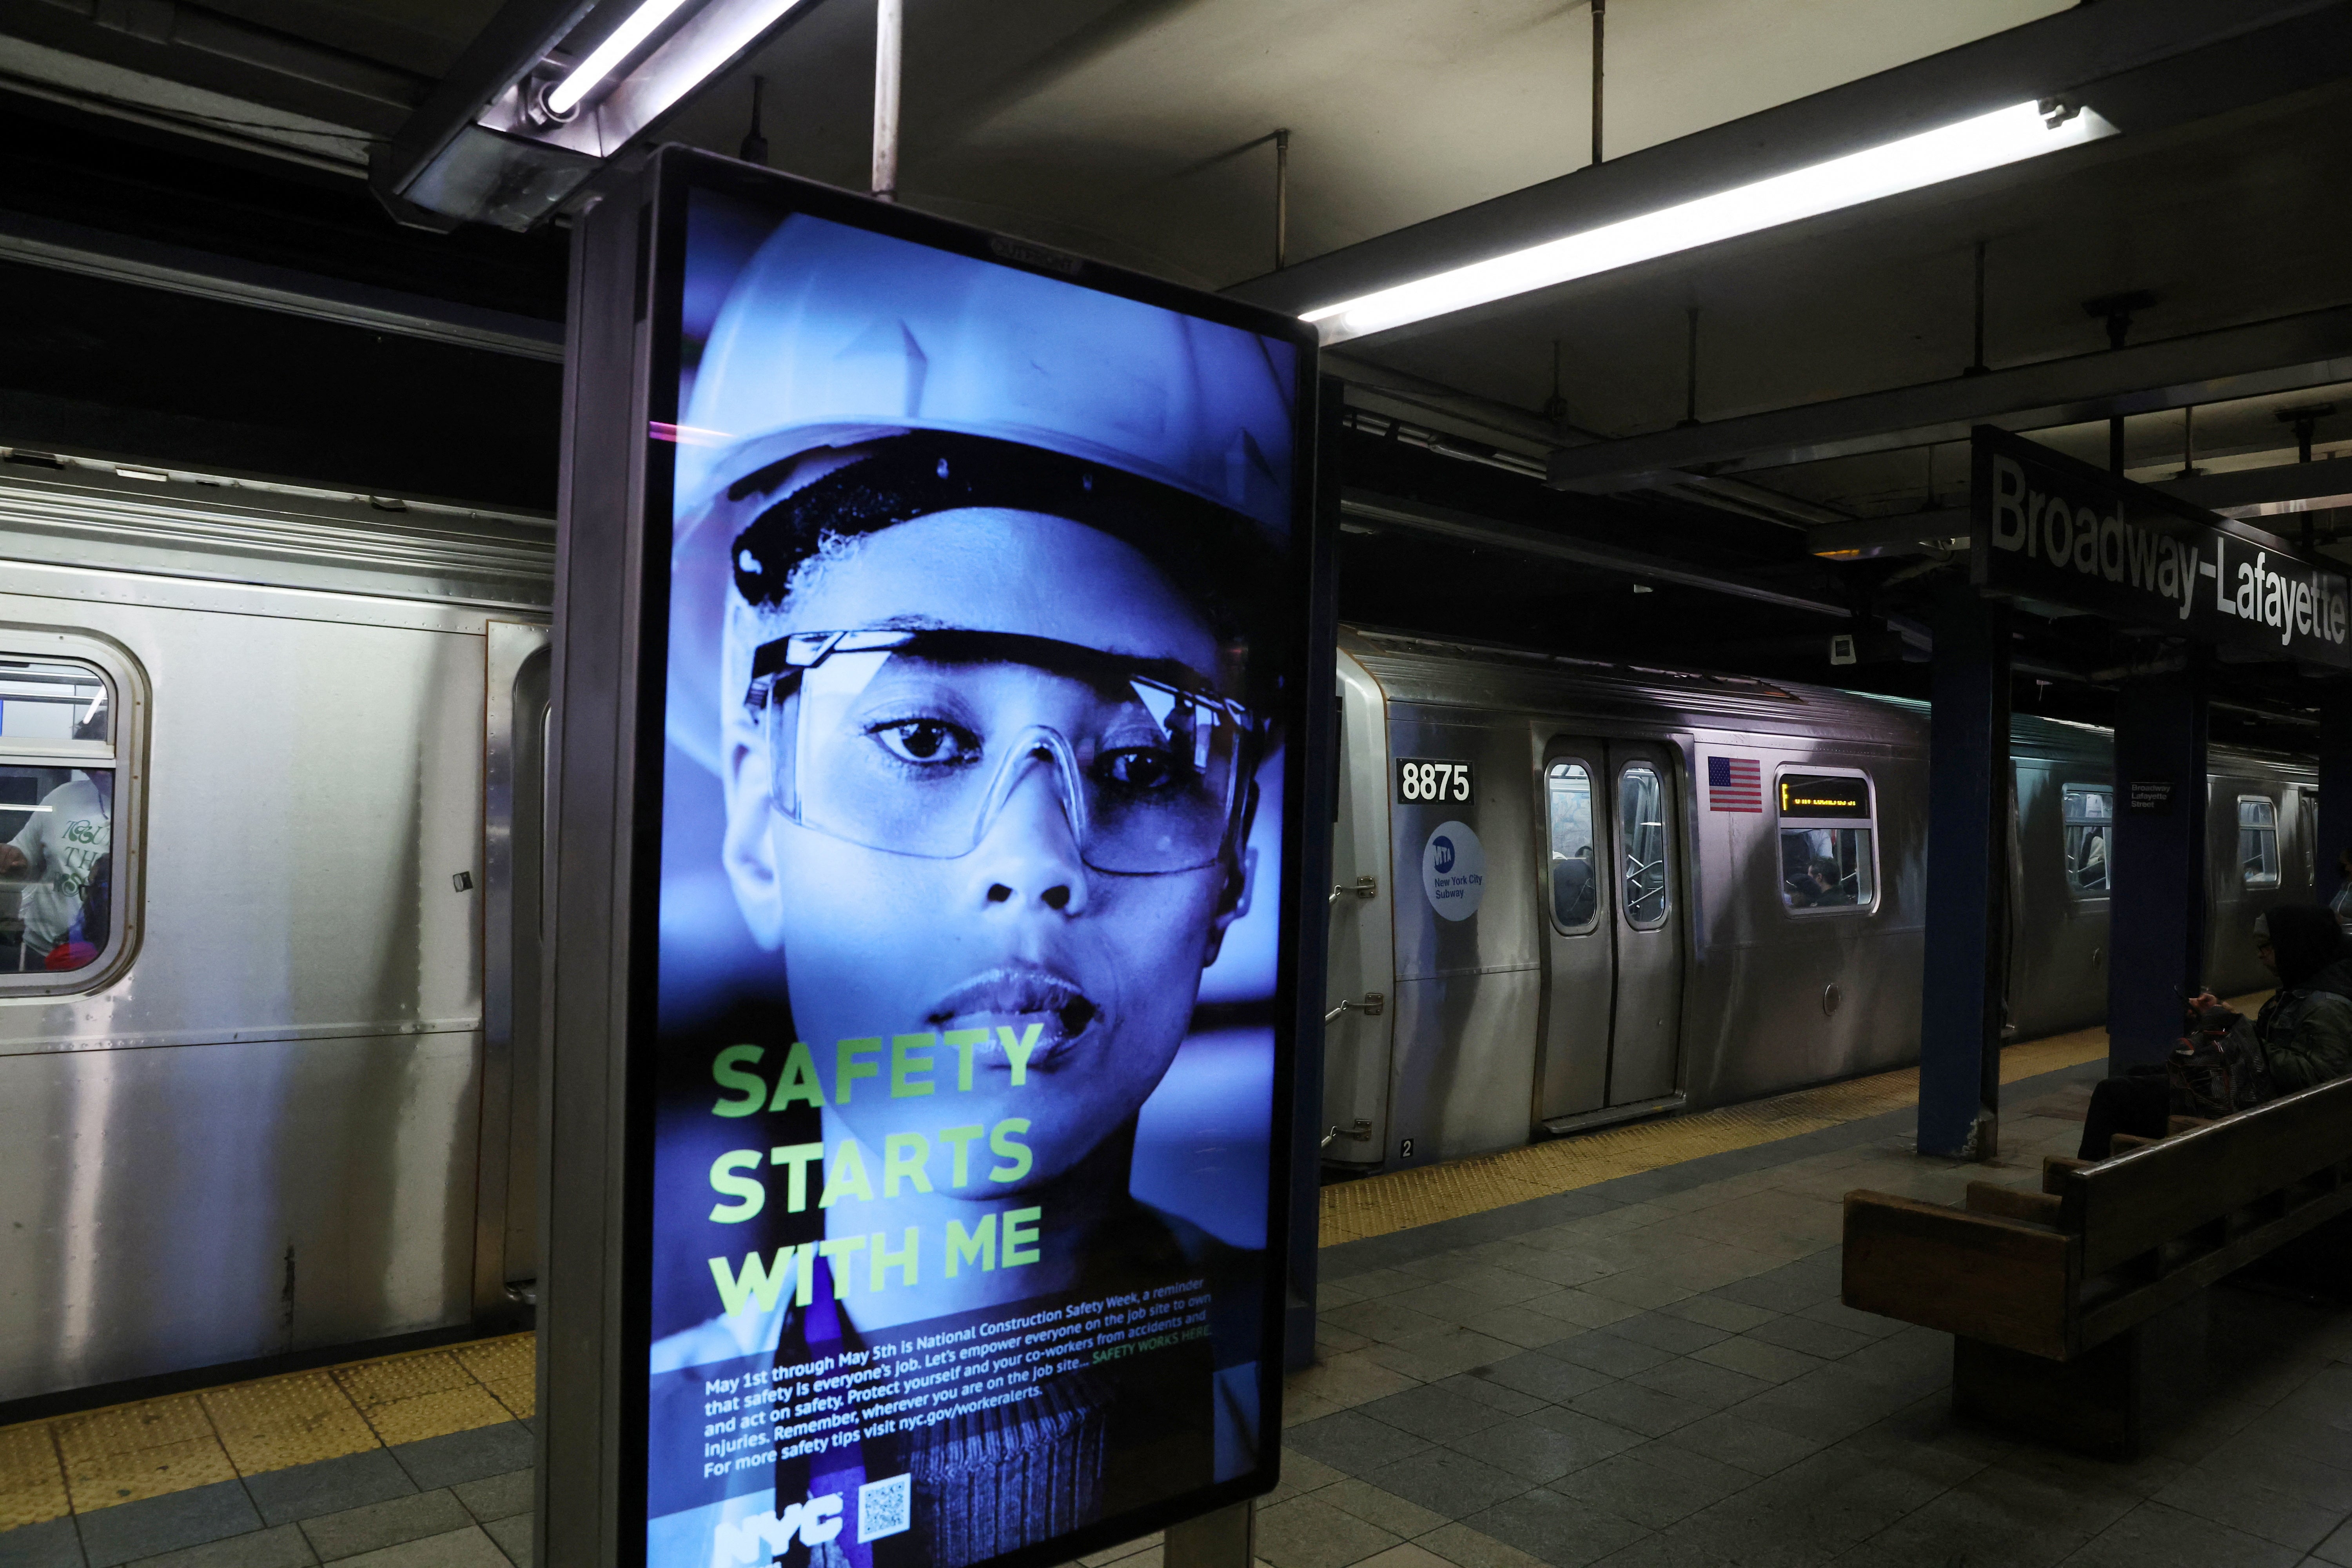 The Broadway-Lafayette subway platform in Manhattan showing an MTA employee on a sign reading "Safety starts with me."